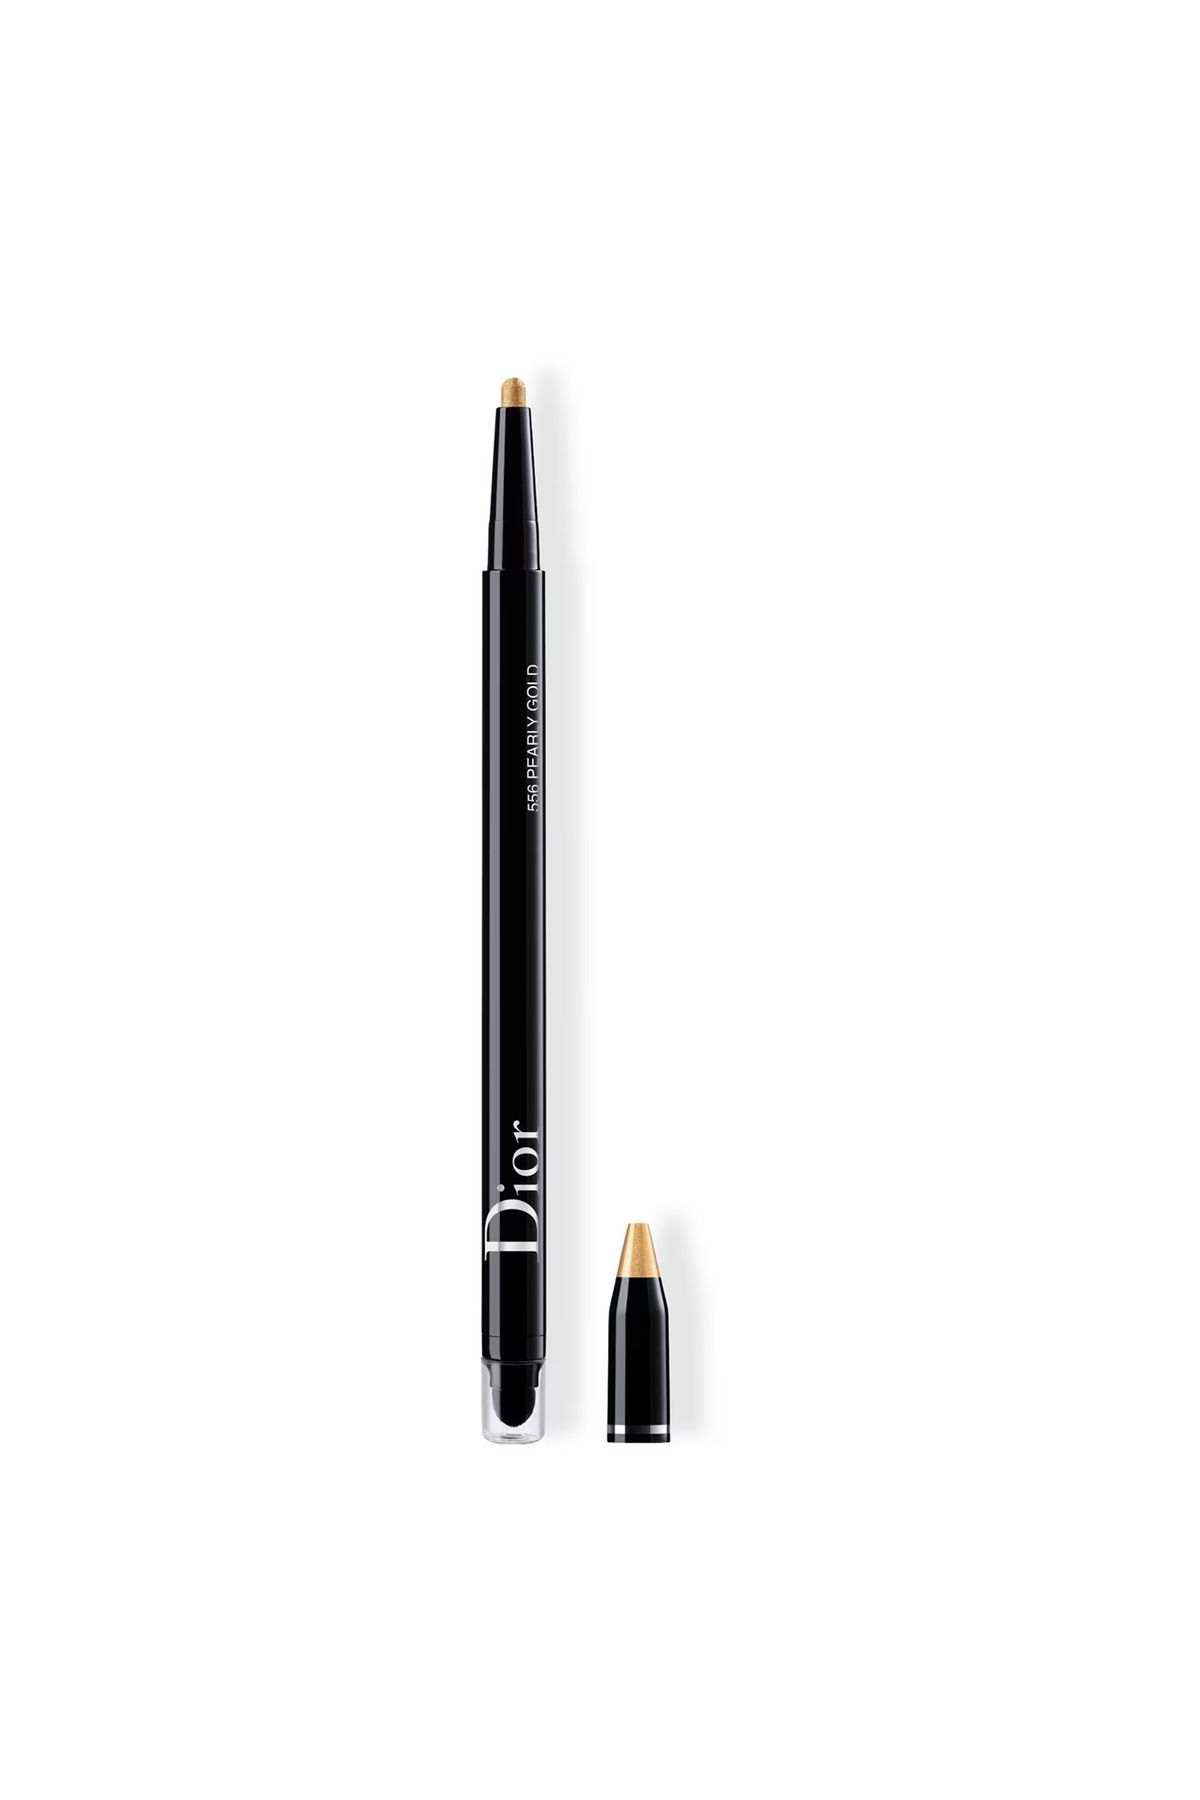 Dior - Diorshow 24H* Stylo Waterproof Eyeliner - 24h* Wear - DIORSHOW 24H STYLO PEARLY GOLD